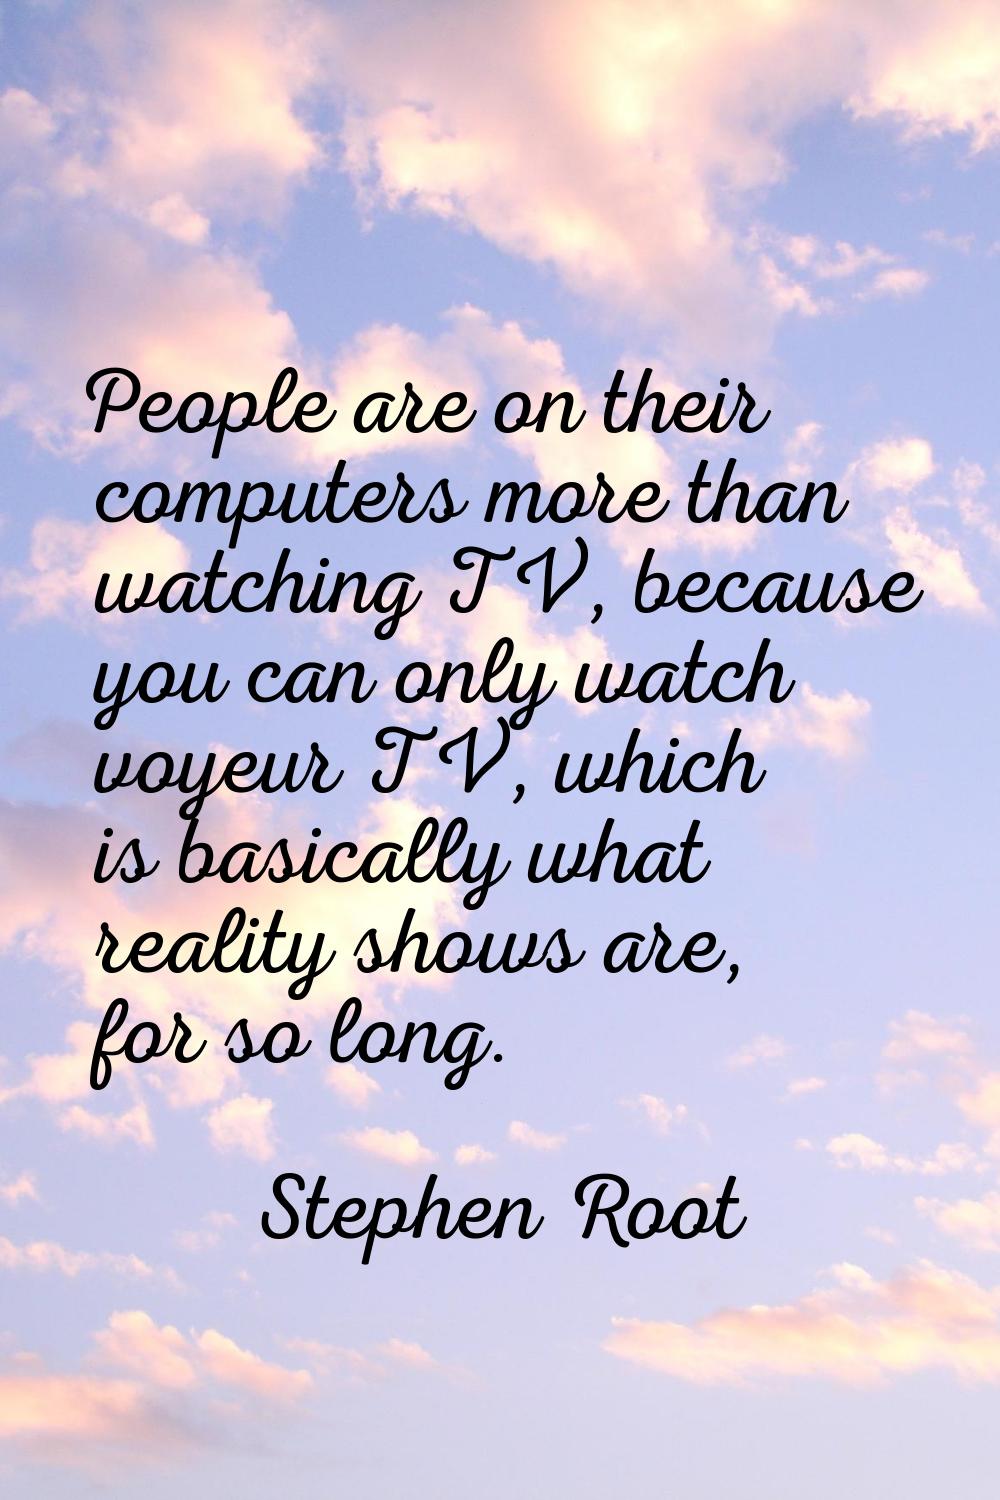 People are on their computers more than watching TV, because you can only watch voyeur TV, which is